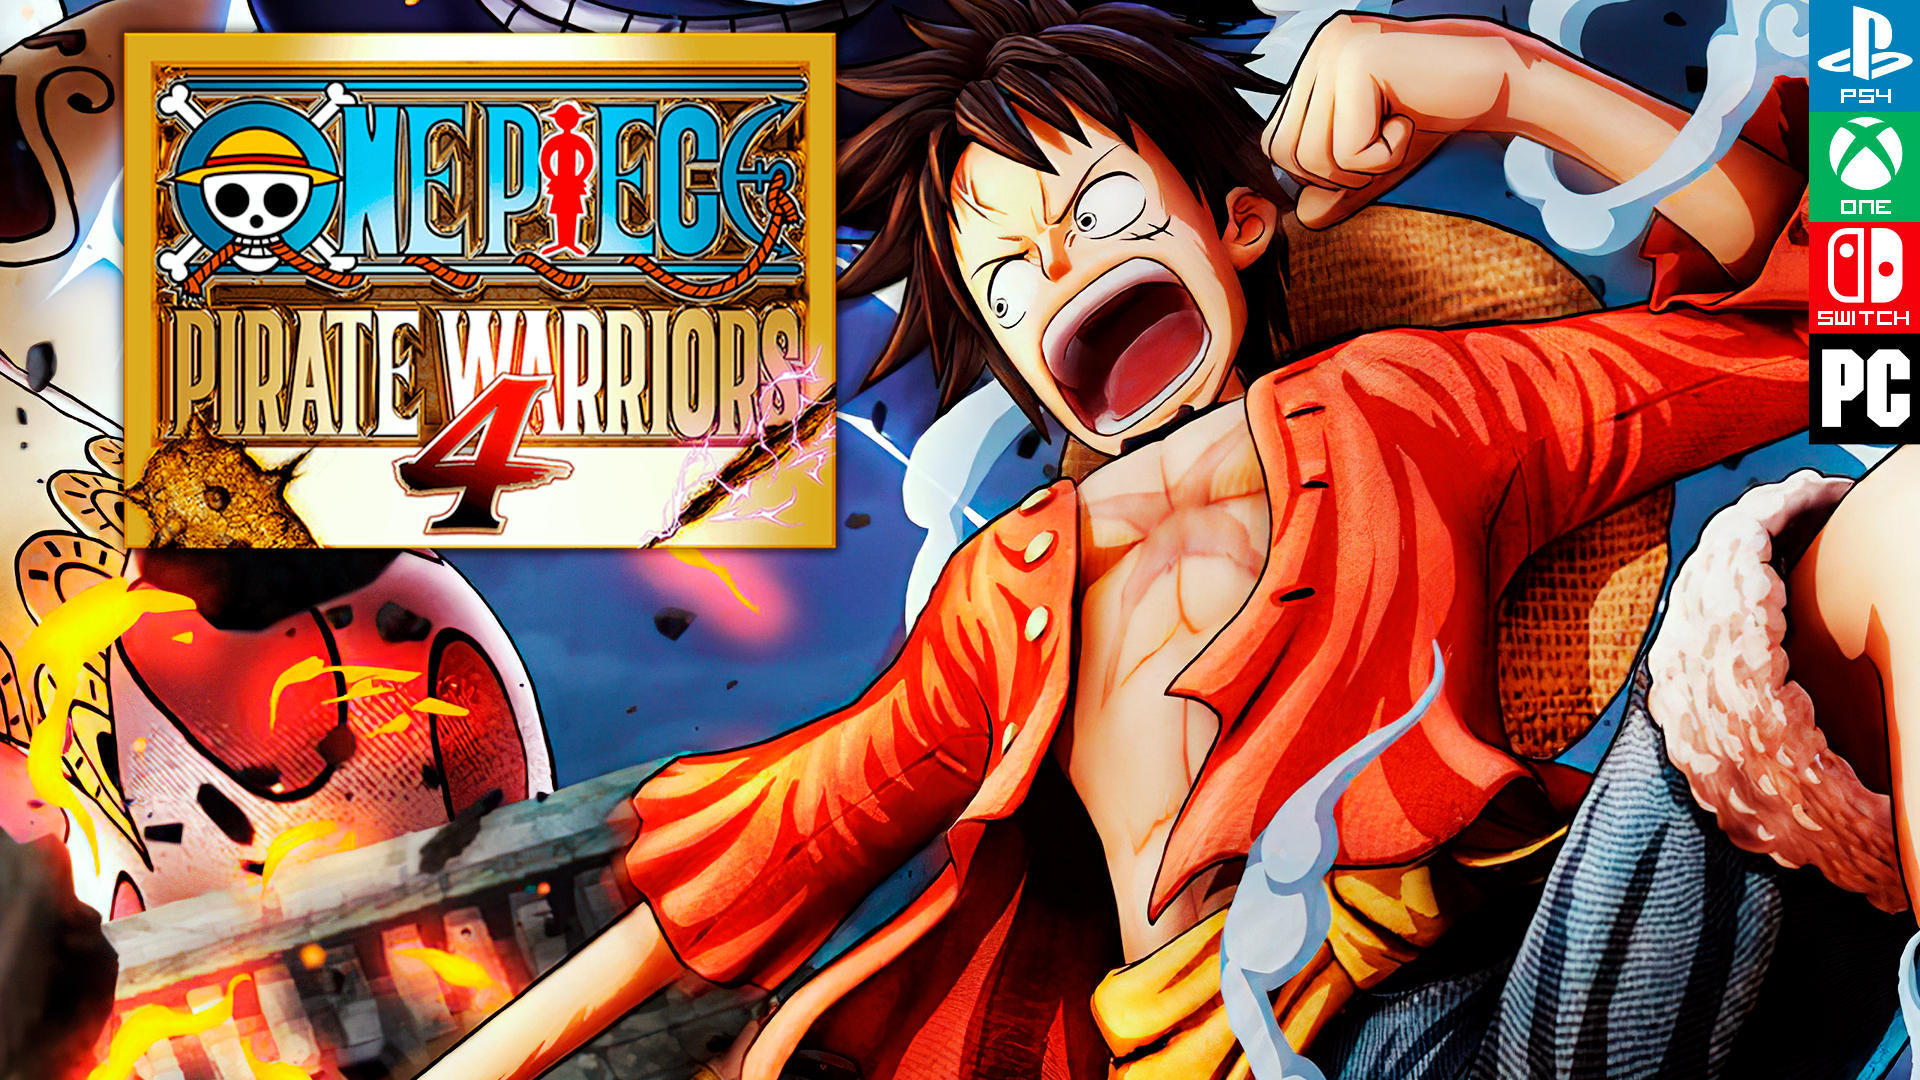 One Piece: Pirate Warriors Roadmap Trophy Guide One Piece:, 59% OFF